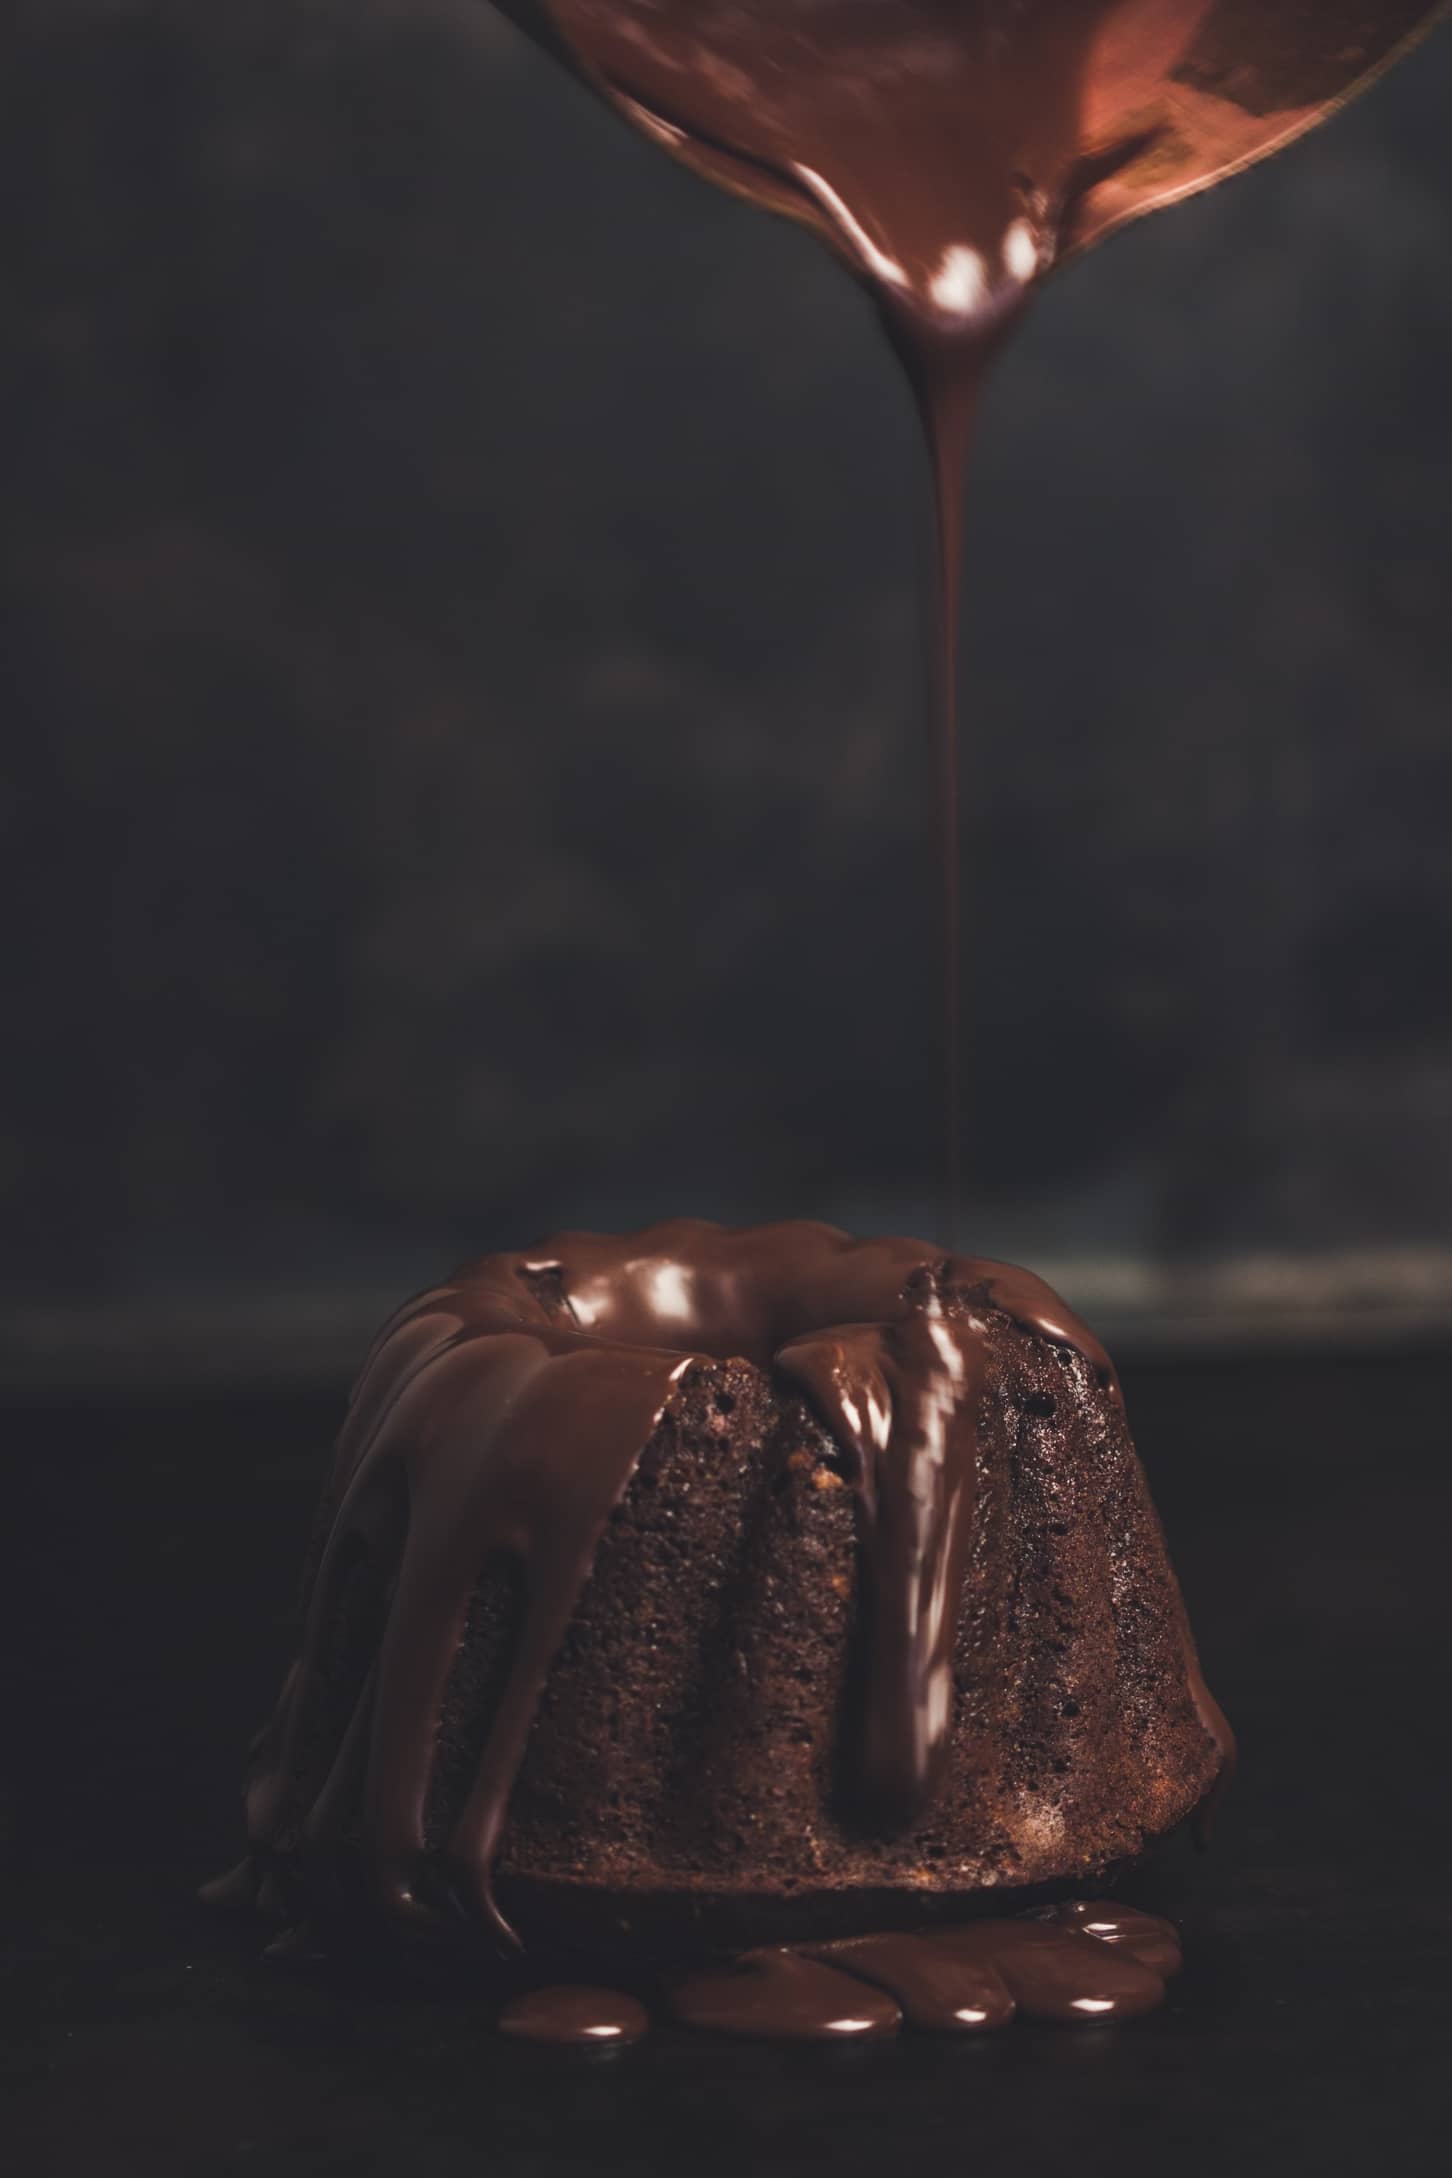 Chocolate beingpoured over a ring of chocolate cake